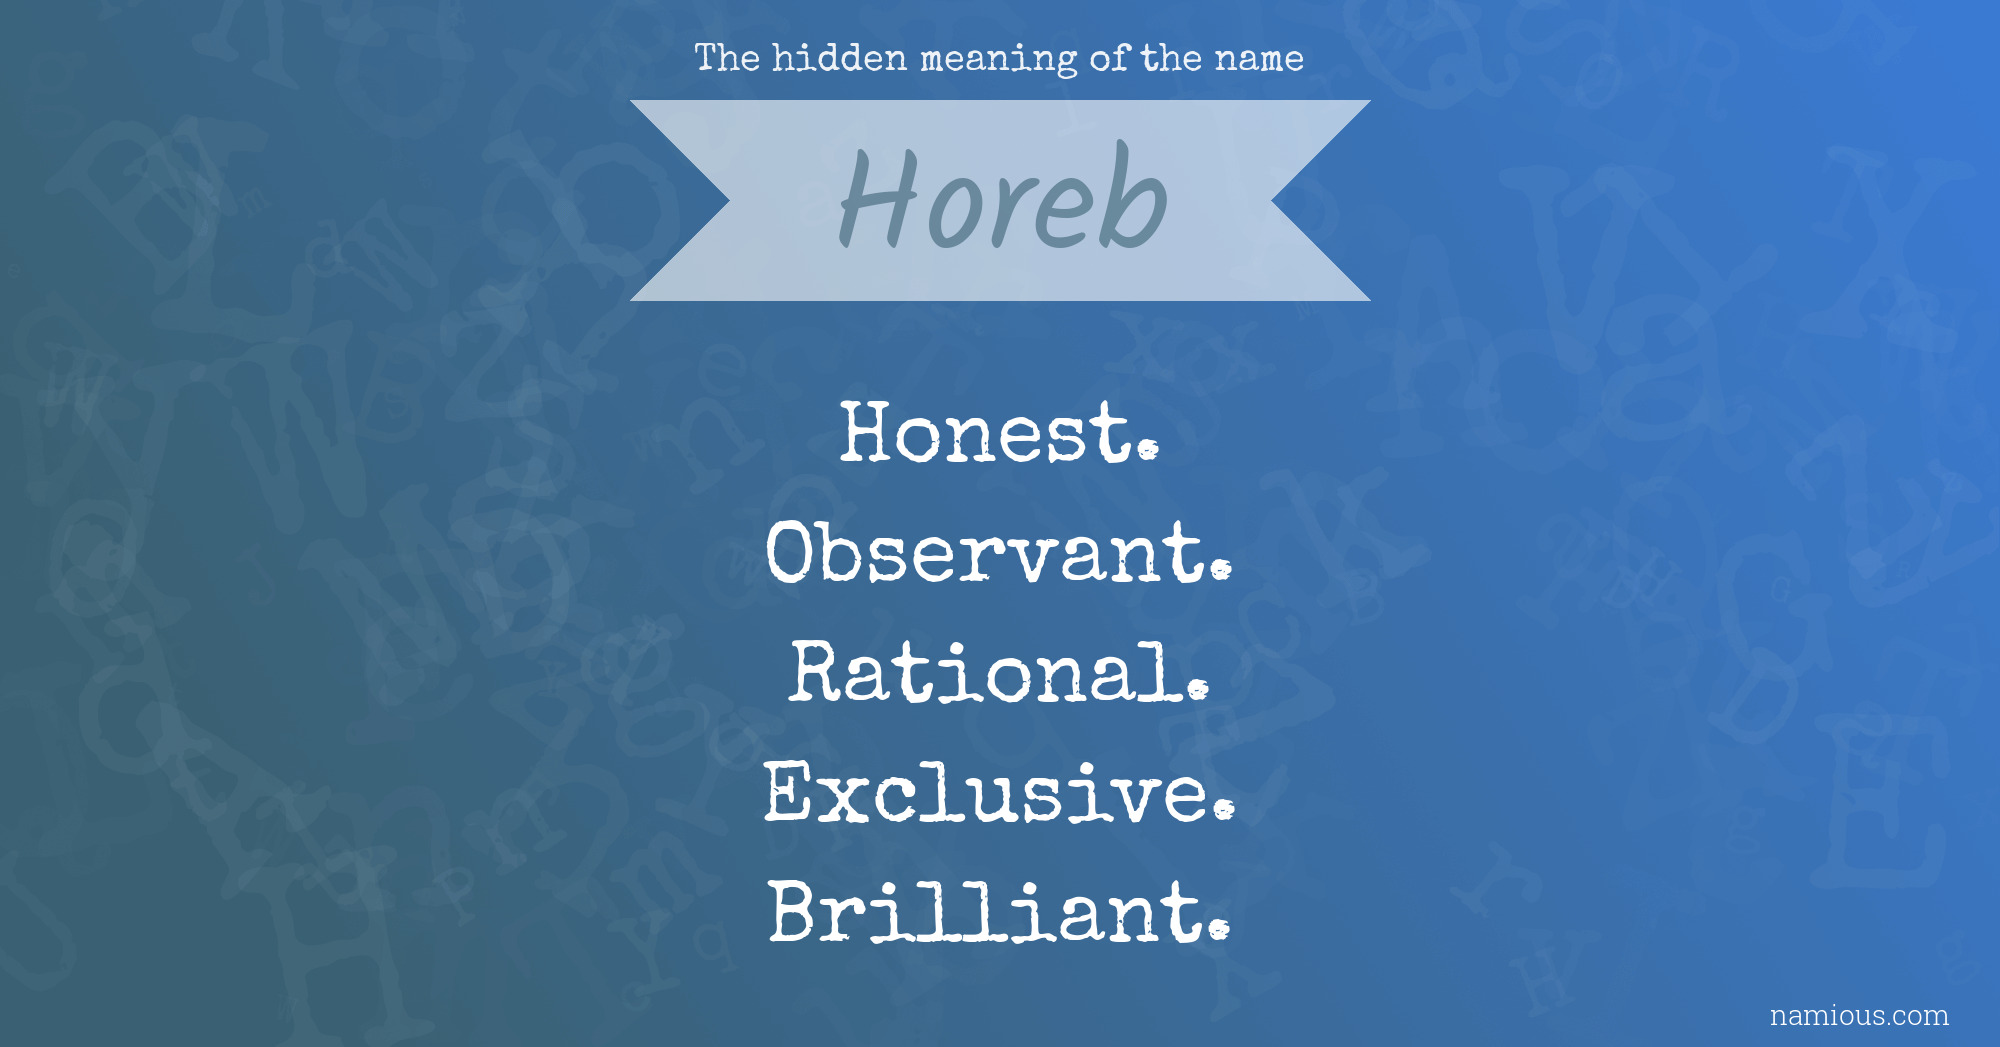 The hidden meaning of the name Horeb